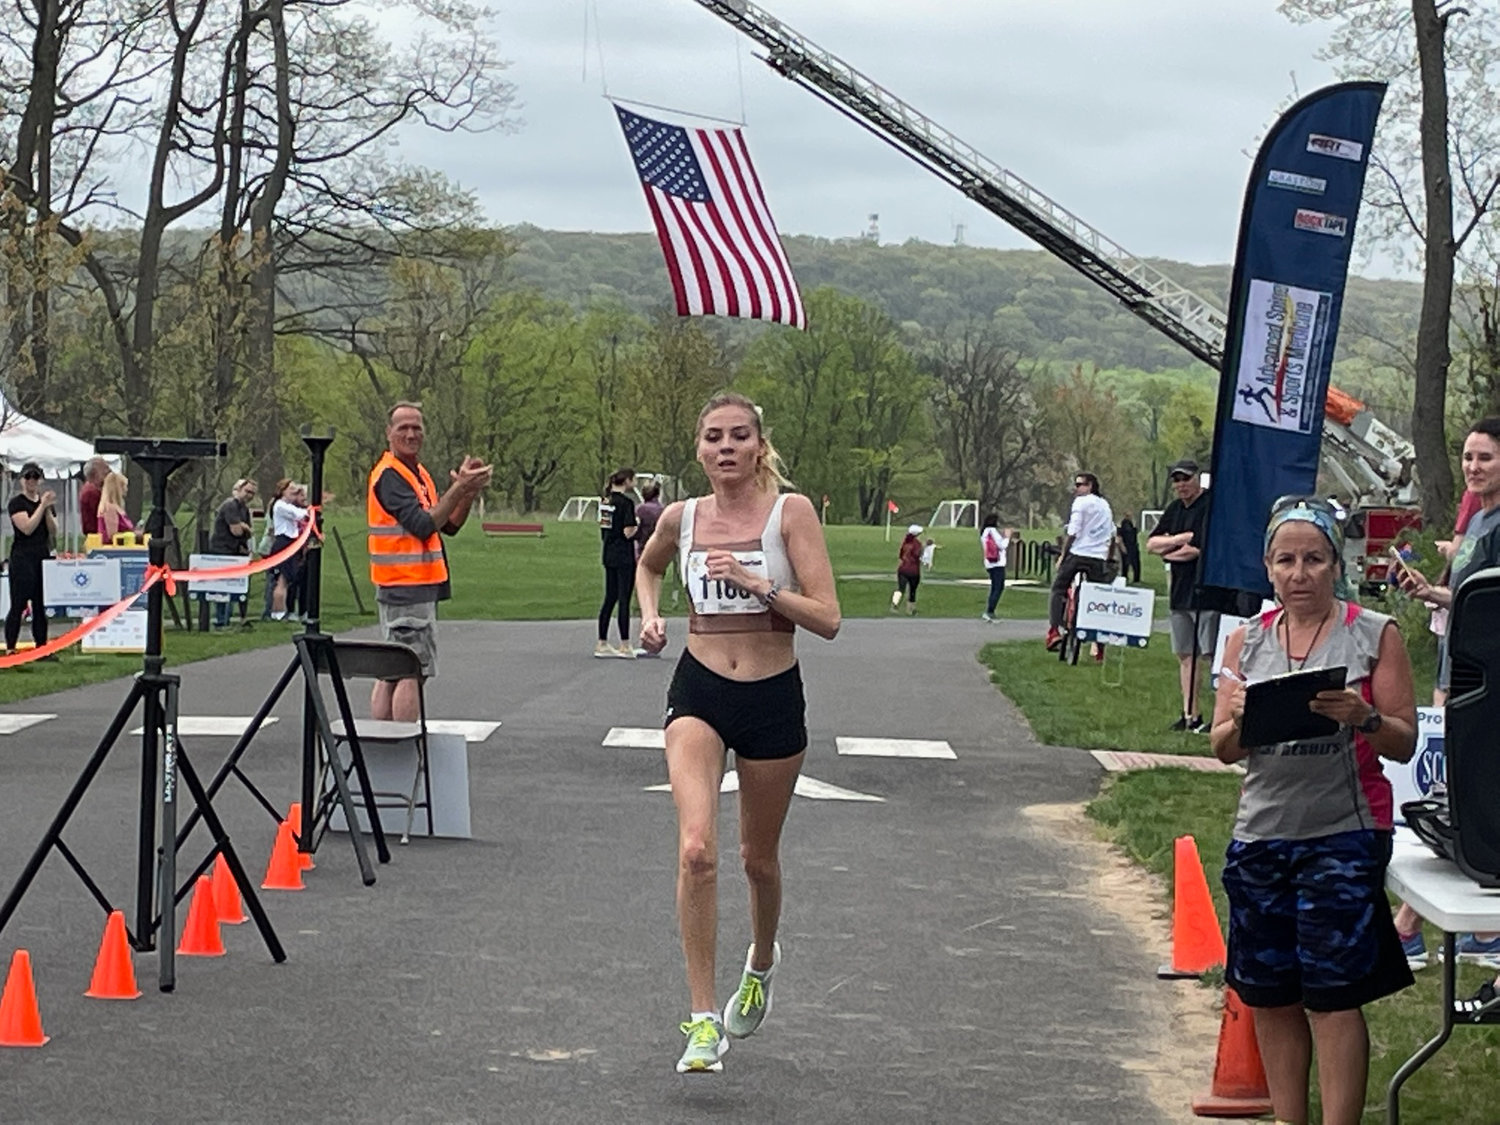 Hannah Borish wins the women’s title in last Saturday’s Be Kind 5K at Holicong Park in Buckingham.